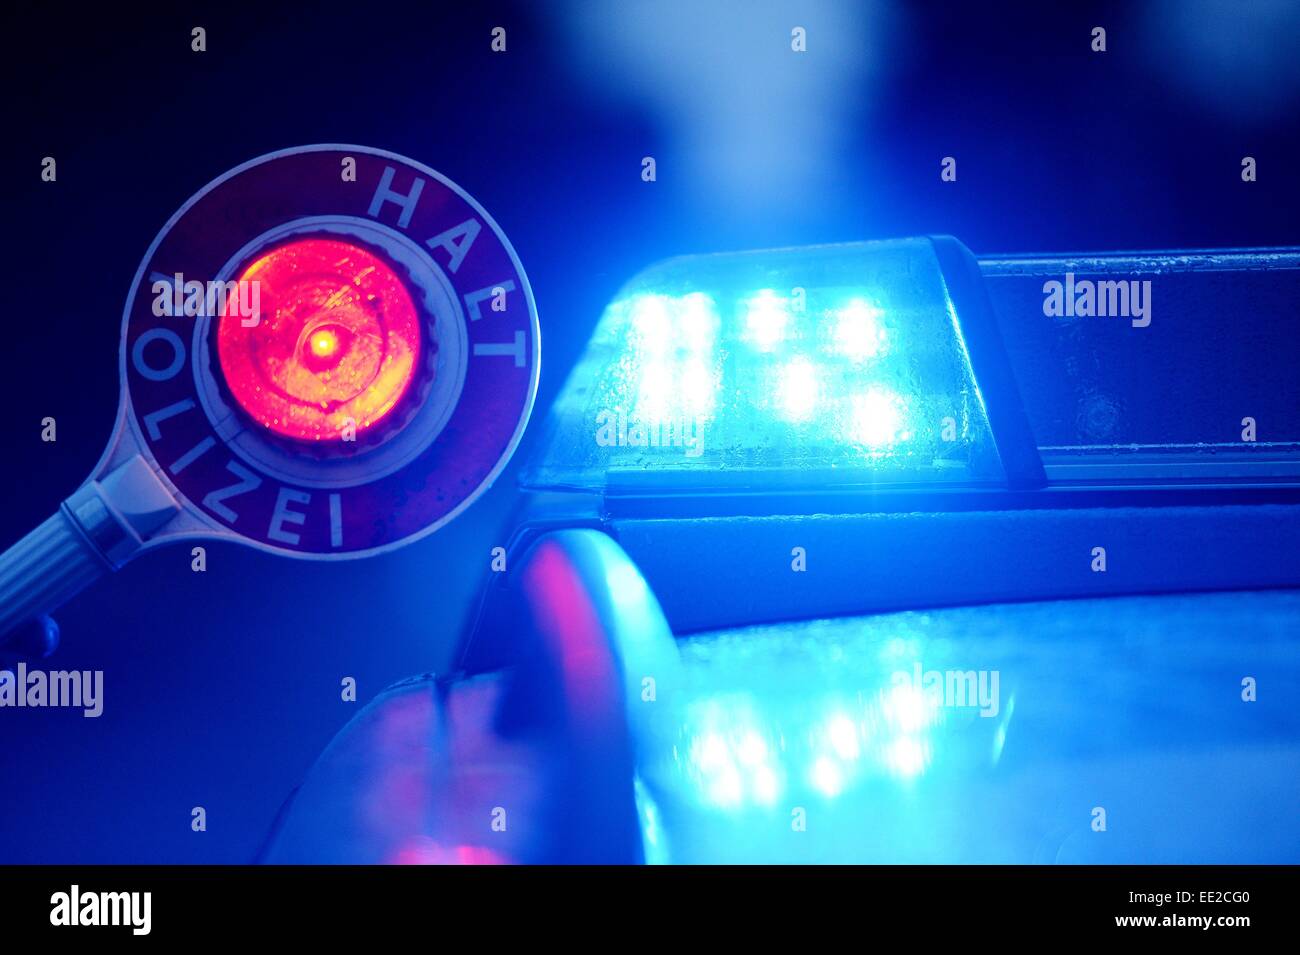 Police Stop sign and blue light, Germany, city of Braunlage, 12. January 2015. Photo: Frank May Stock Photo